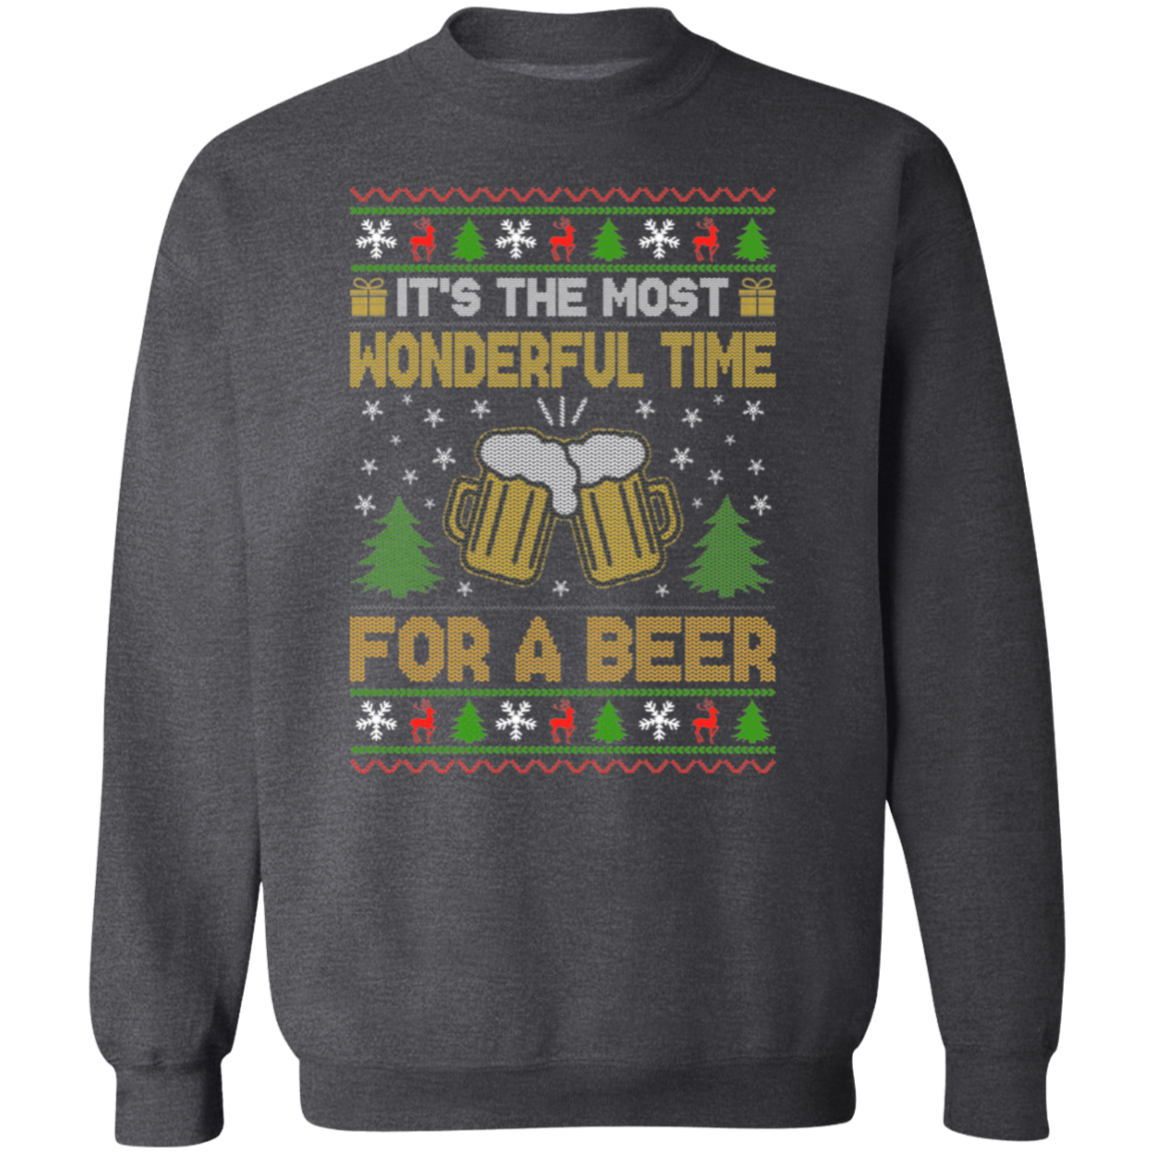 It's The Most Wonderful Time For a Beer - Unisex Ugly Sweater, Christmas, Winter, Fall